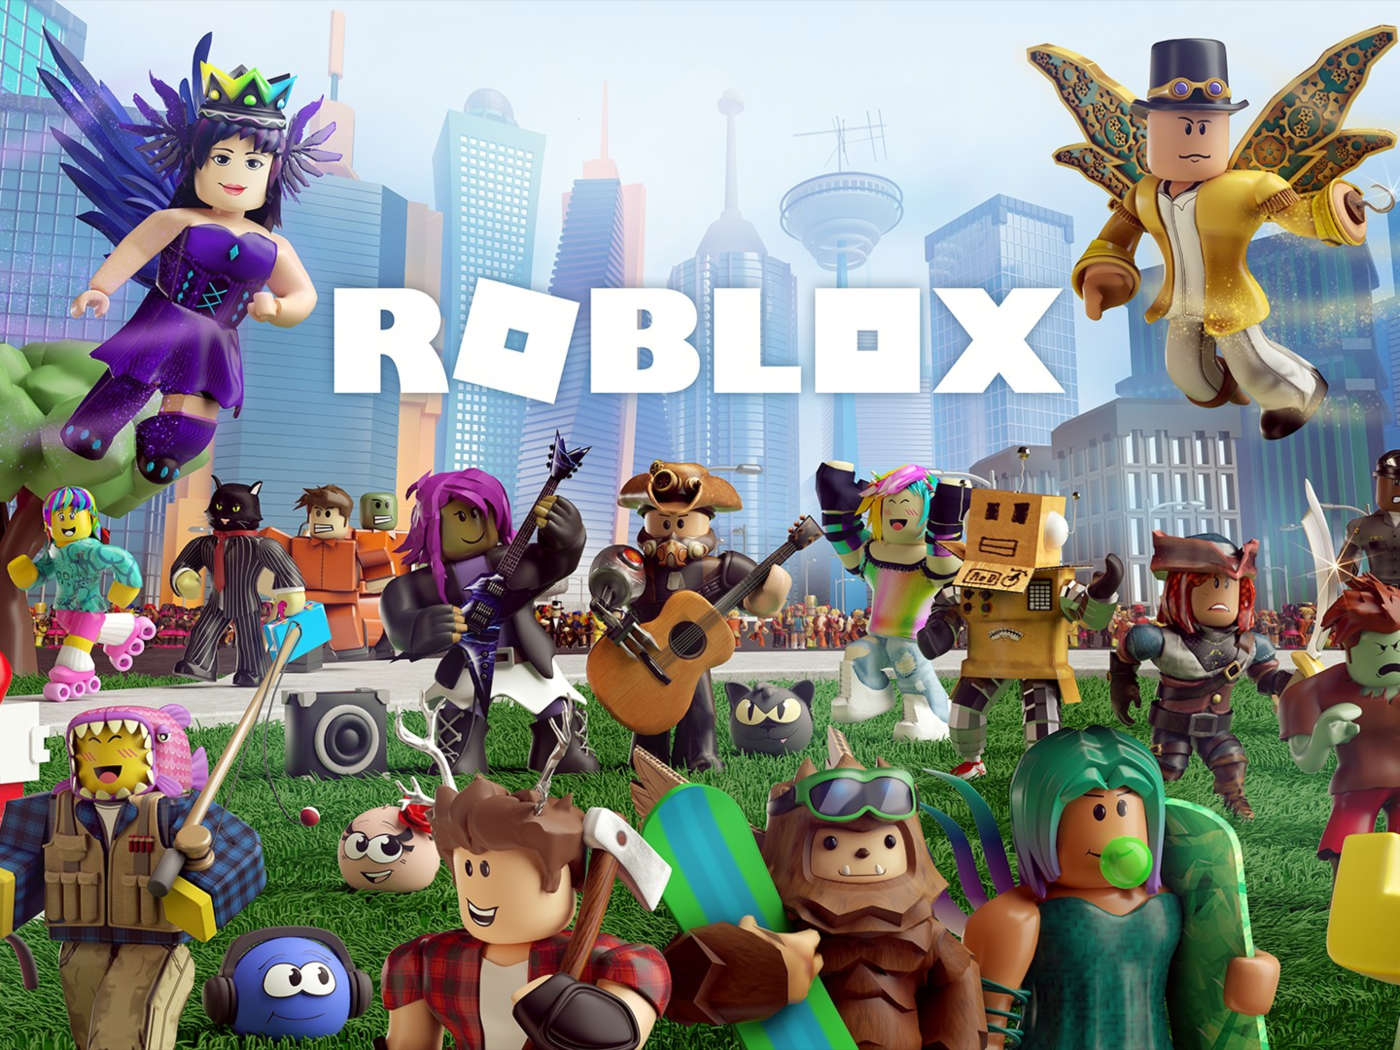 How to Play Roblox on Oculus Quest 2